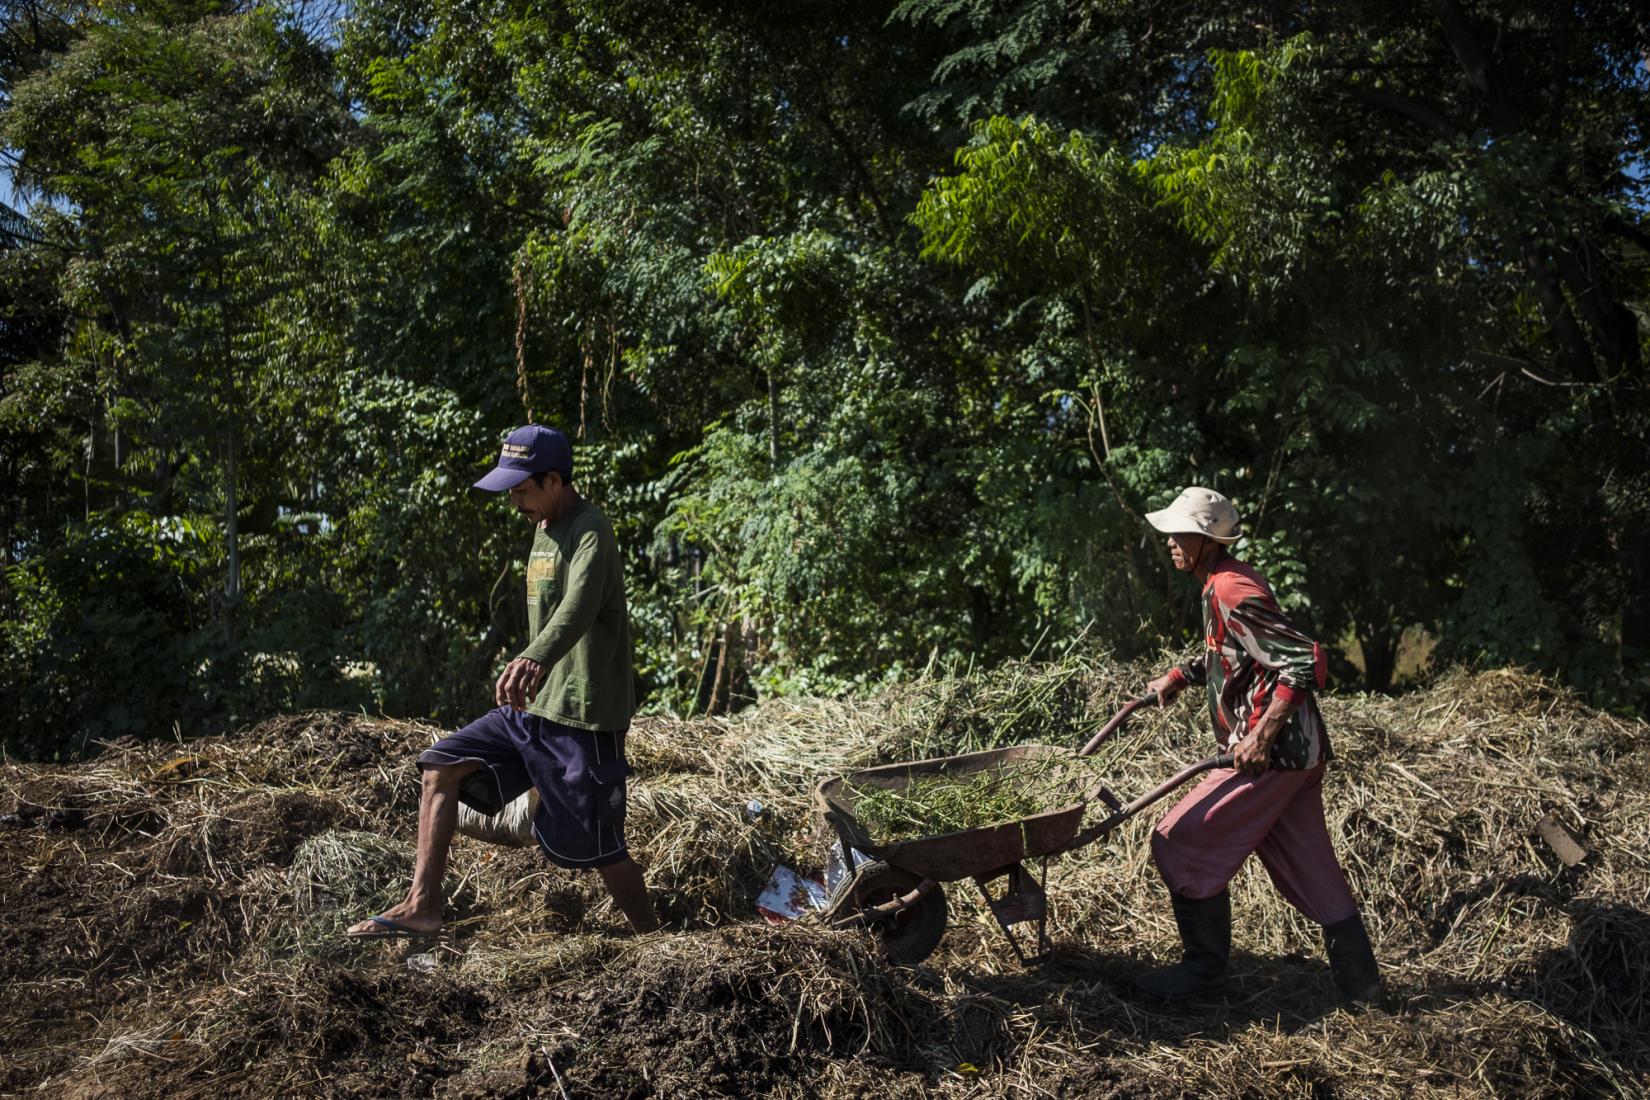 Members of the ACIAR cattle project in Karang Kendal Hamlet drop dung and compost material on a large pile.